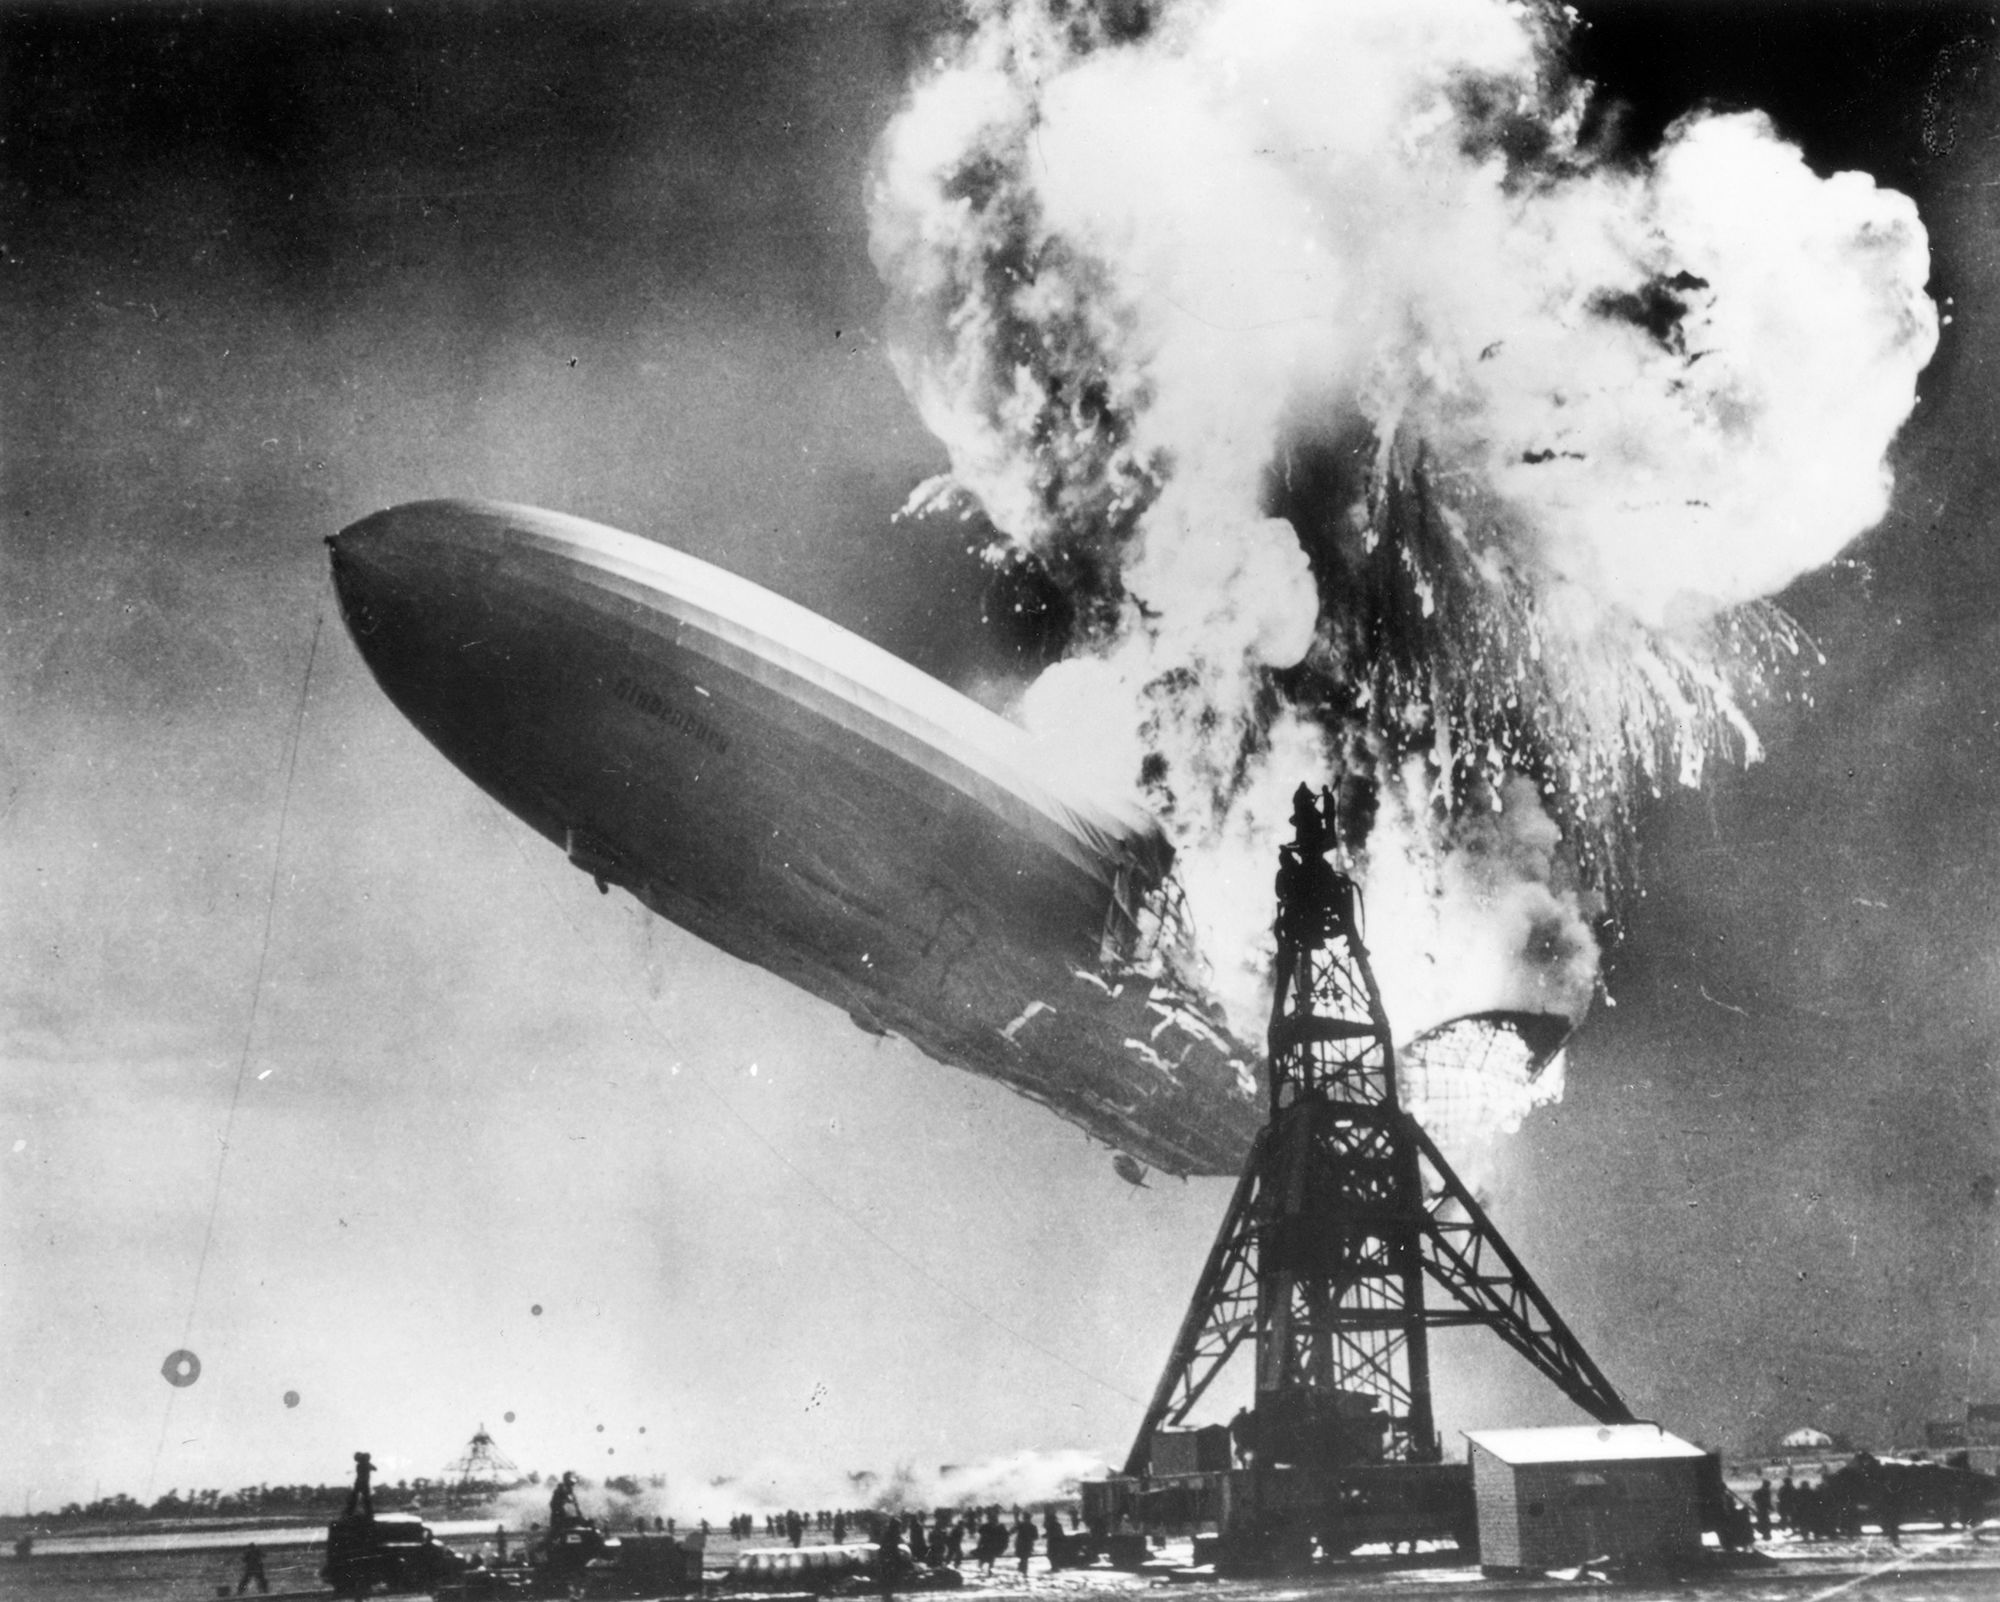 The last survivor of the Hindenburg disaster has died, family says | CNN